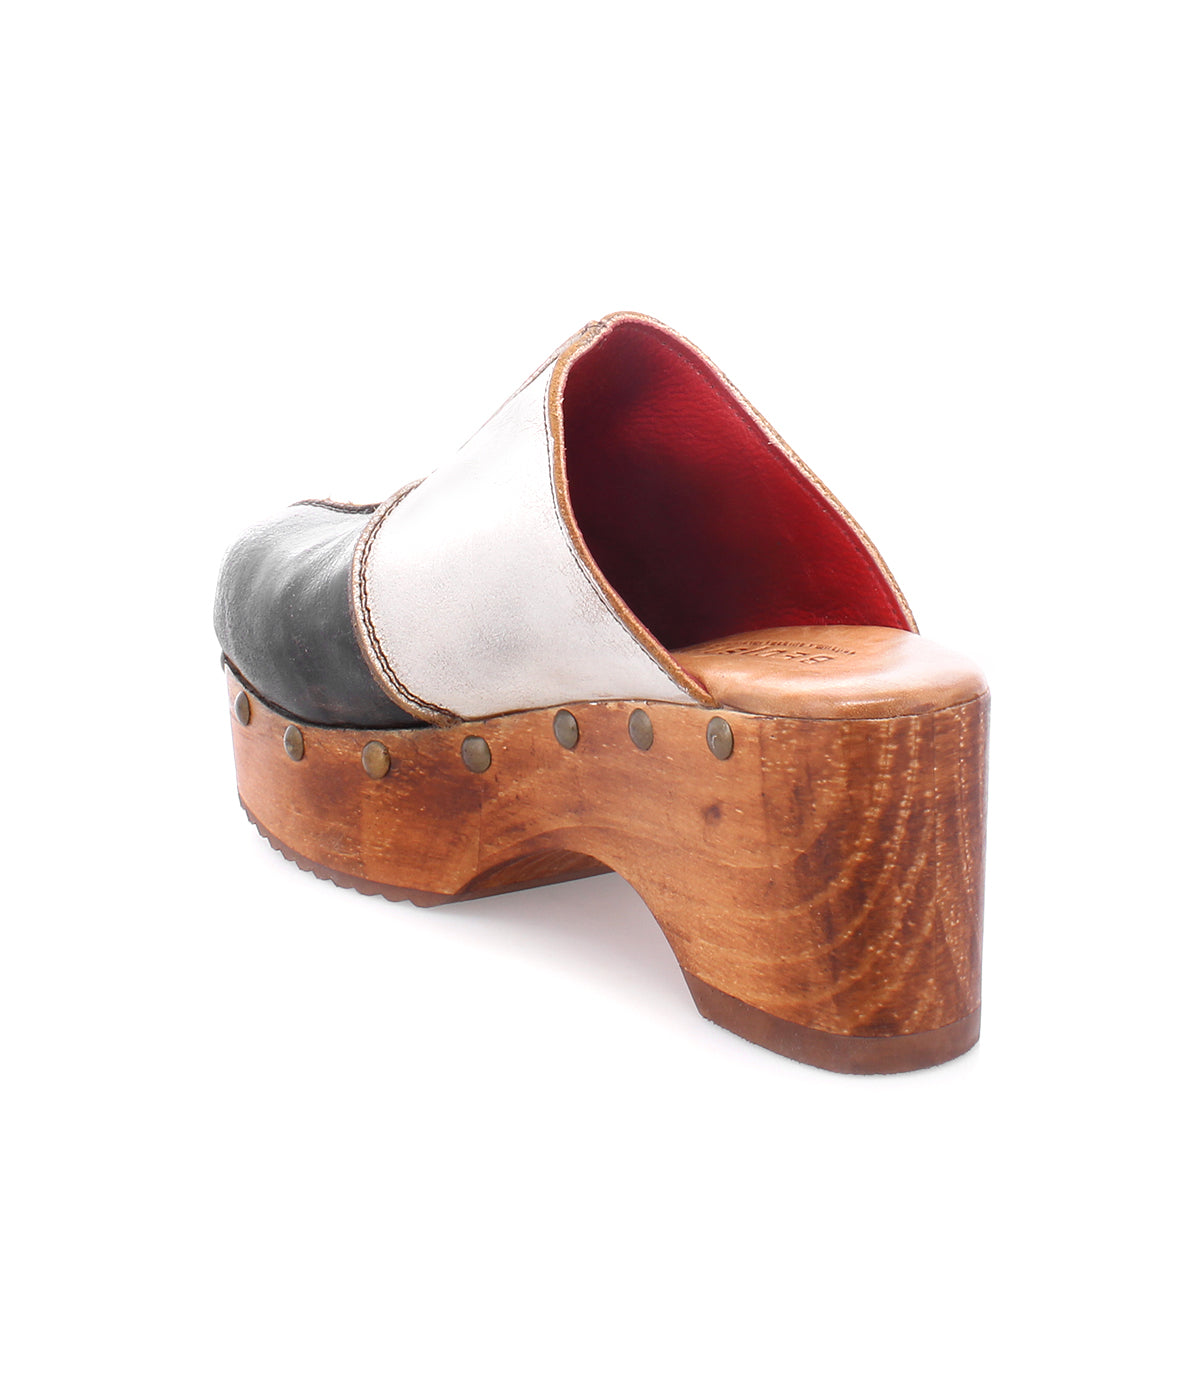 A sustainable wooden Mista clog for women with black and white stripes from Bed Stu.